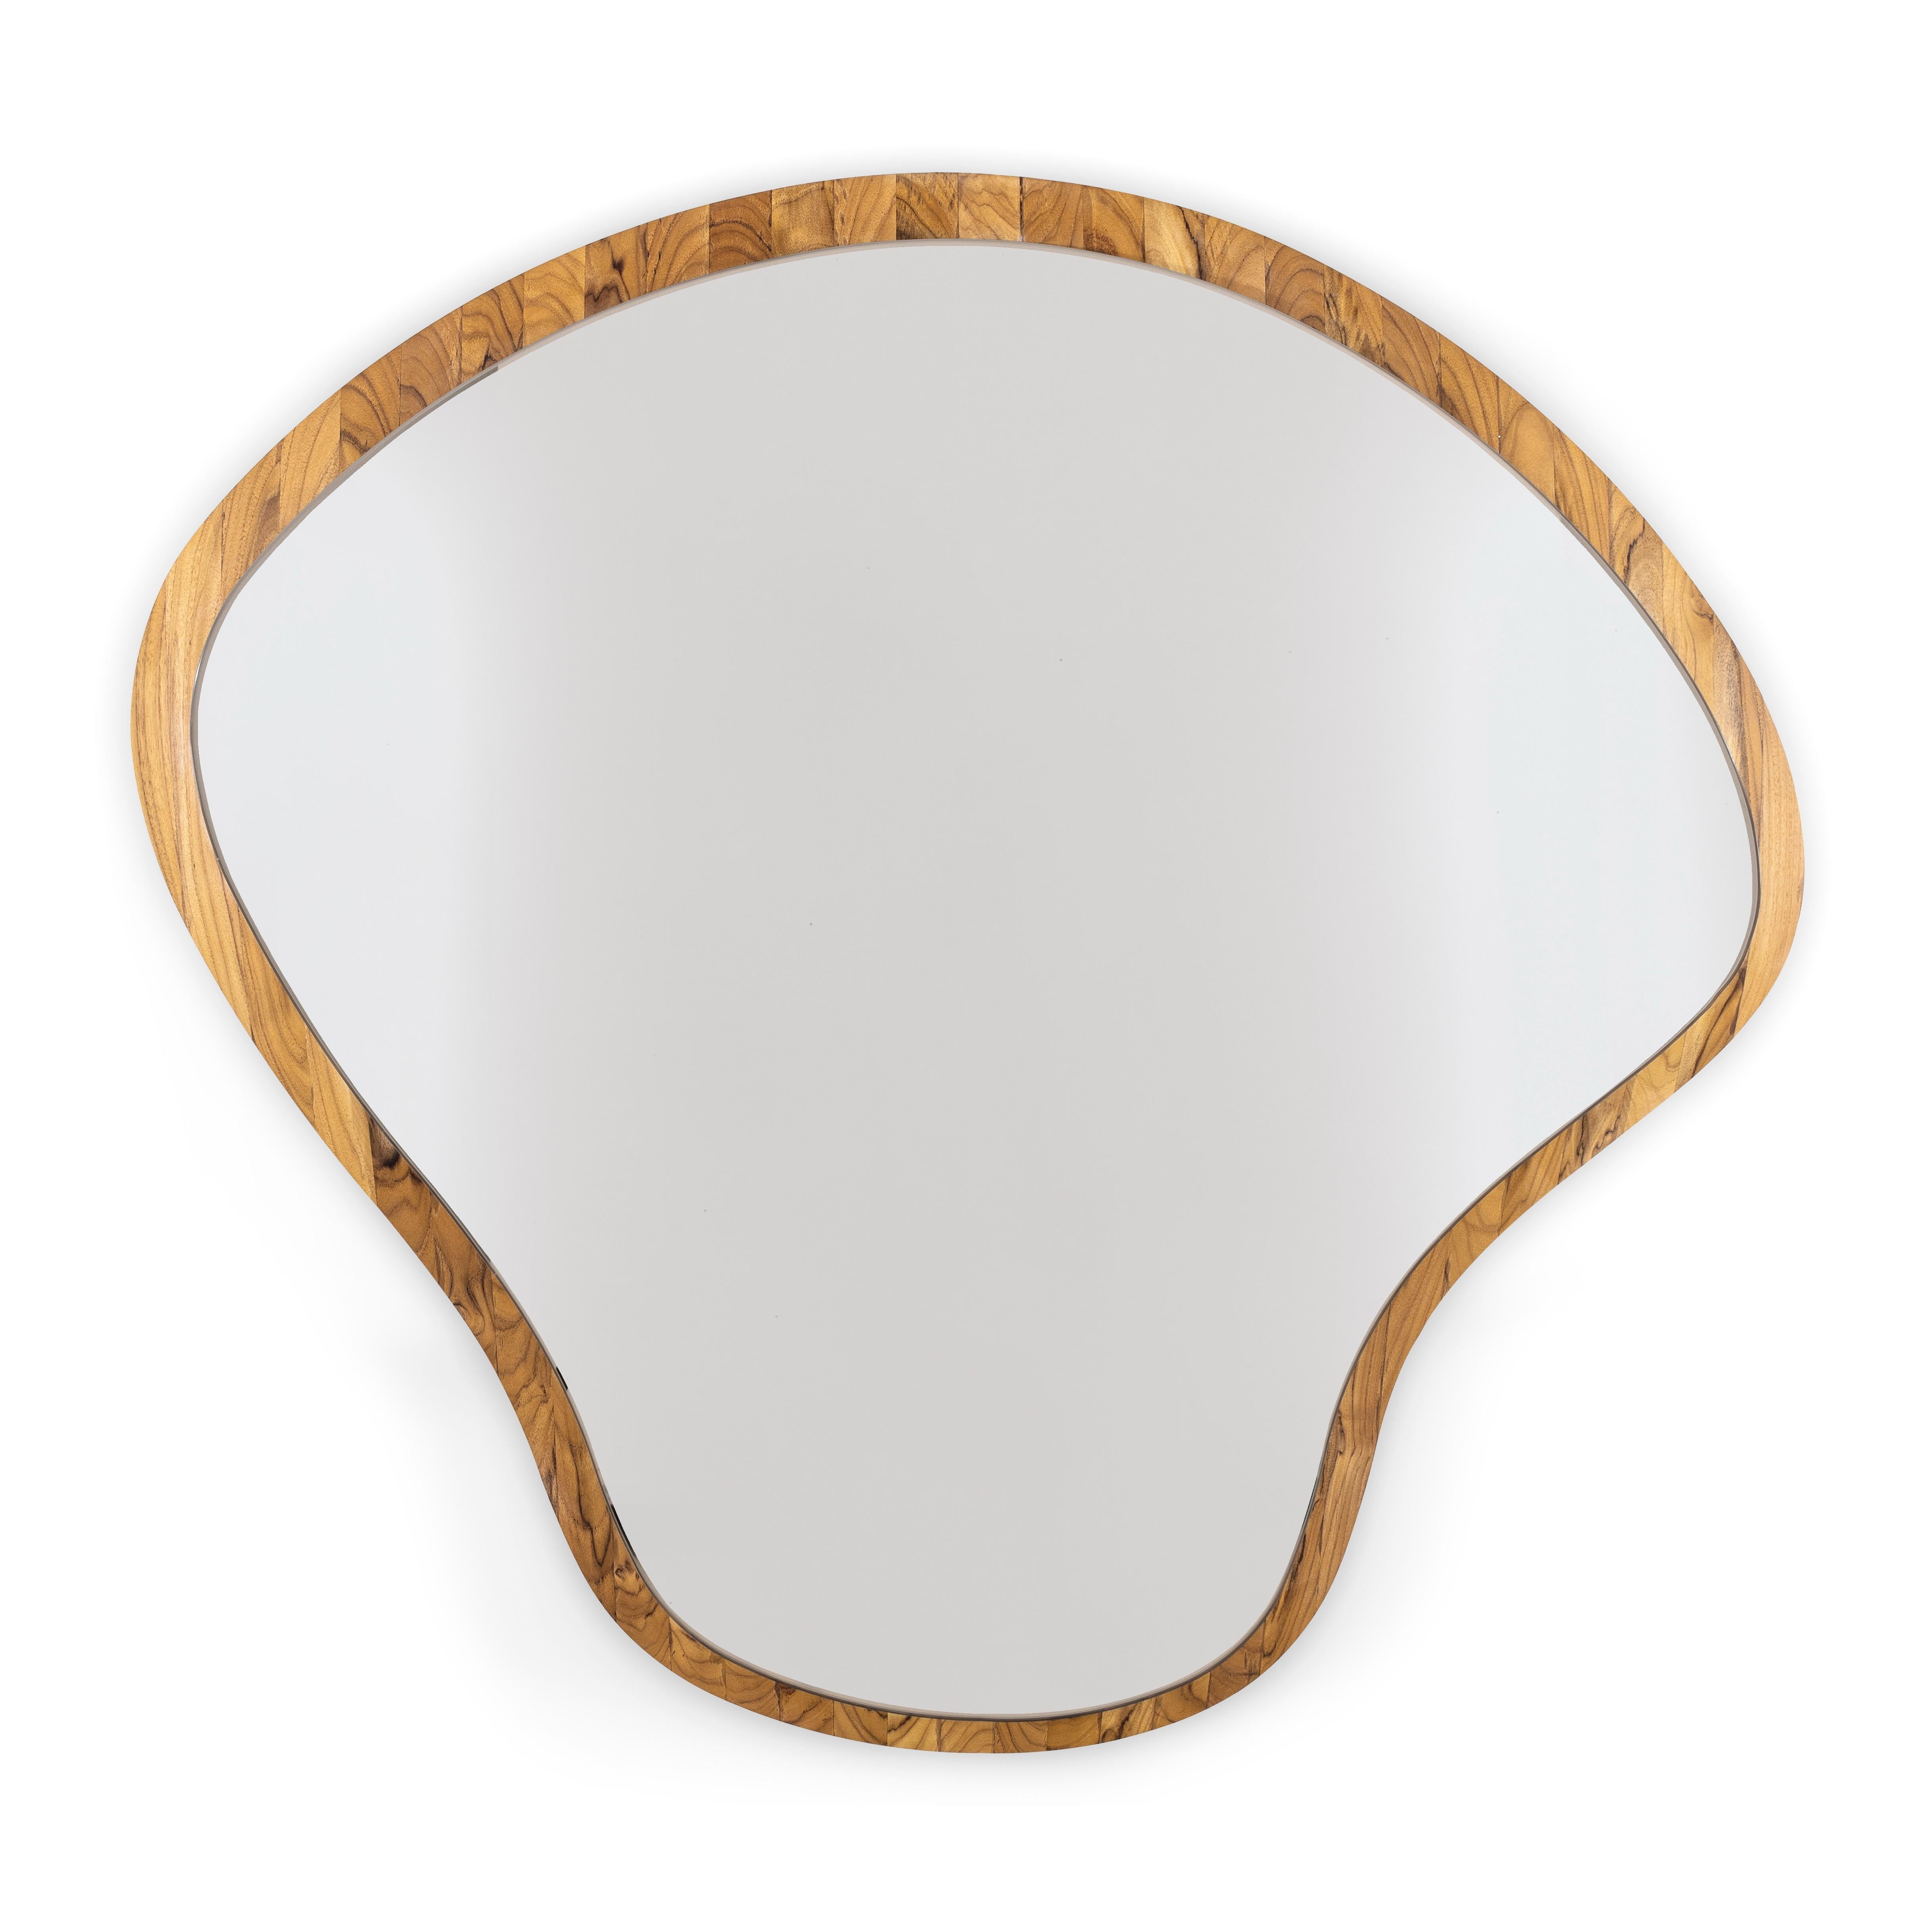 Pante Mirror in Teak Wood Finish, Set of 4 In New Condition For Sale In Miami, FL